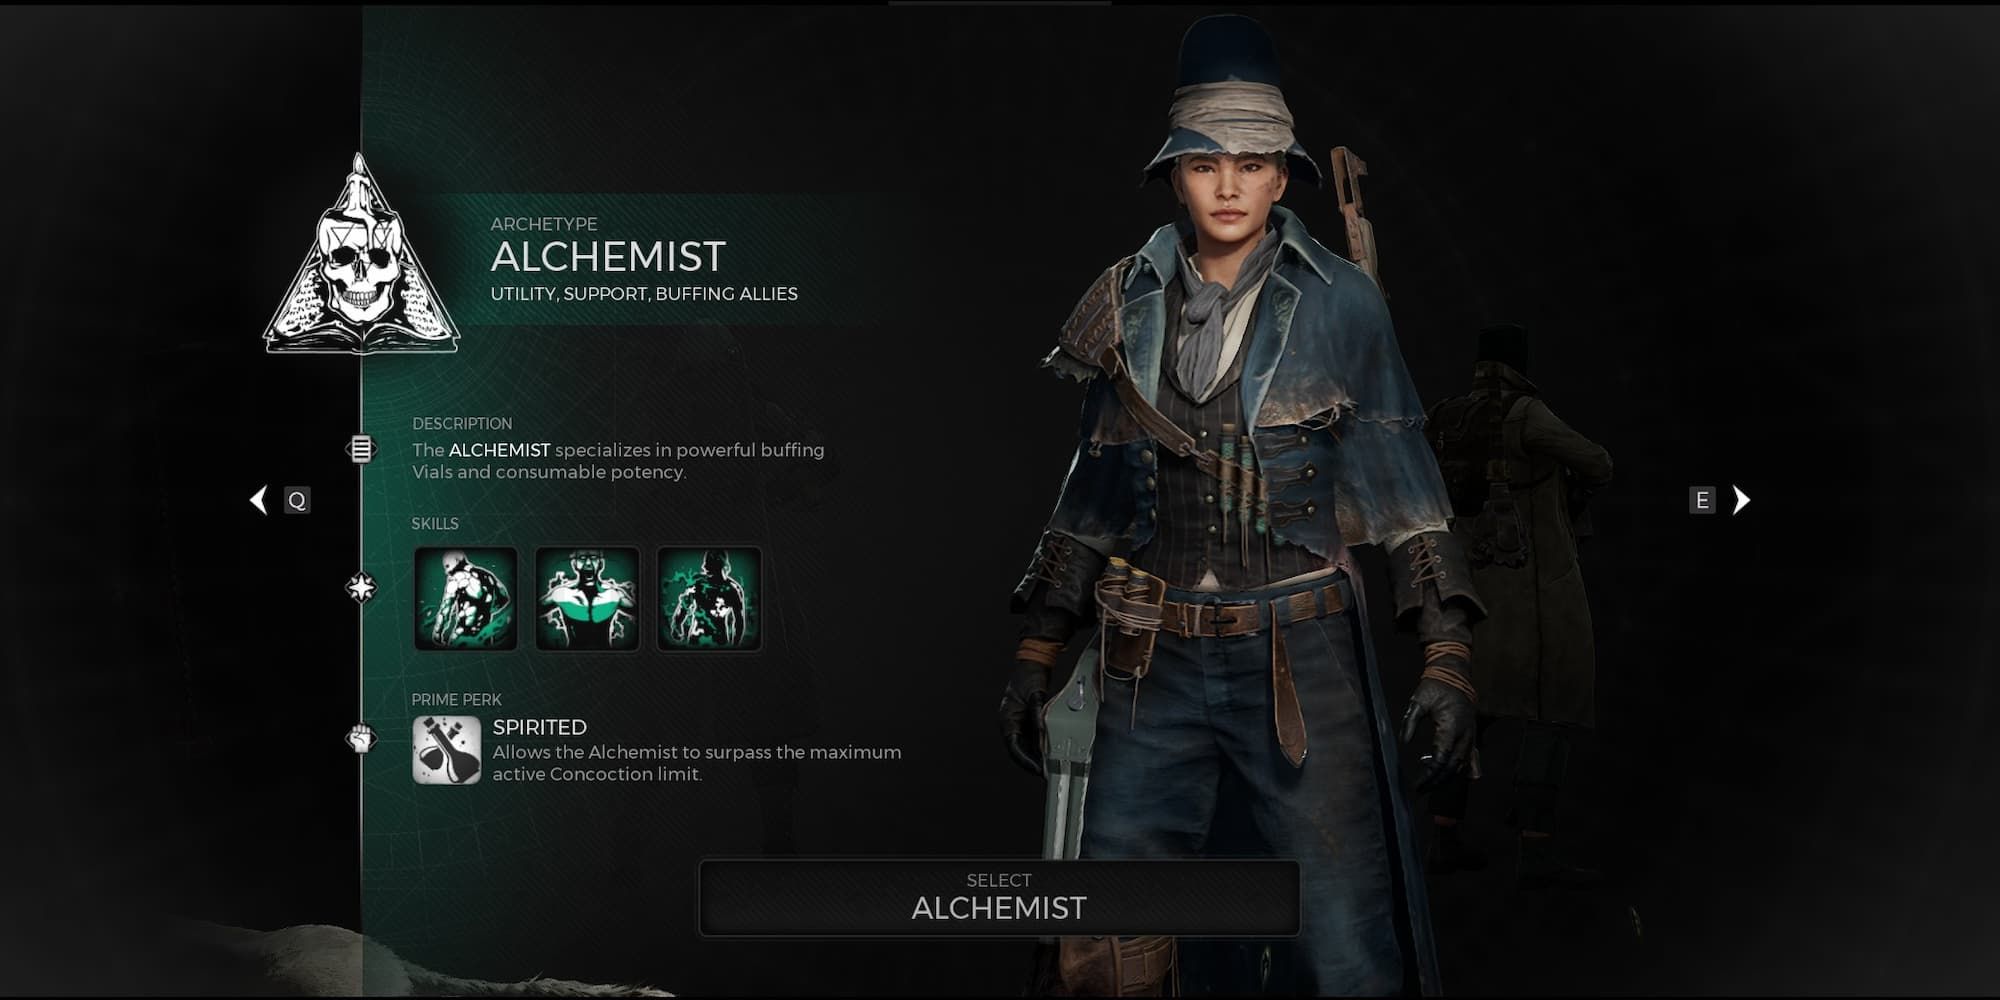 The Alchemist in Remnant 2's character creator